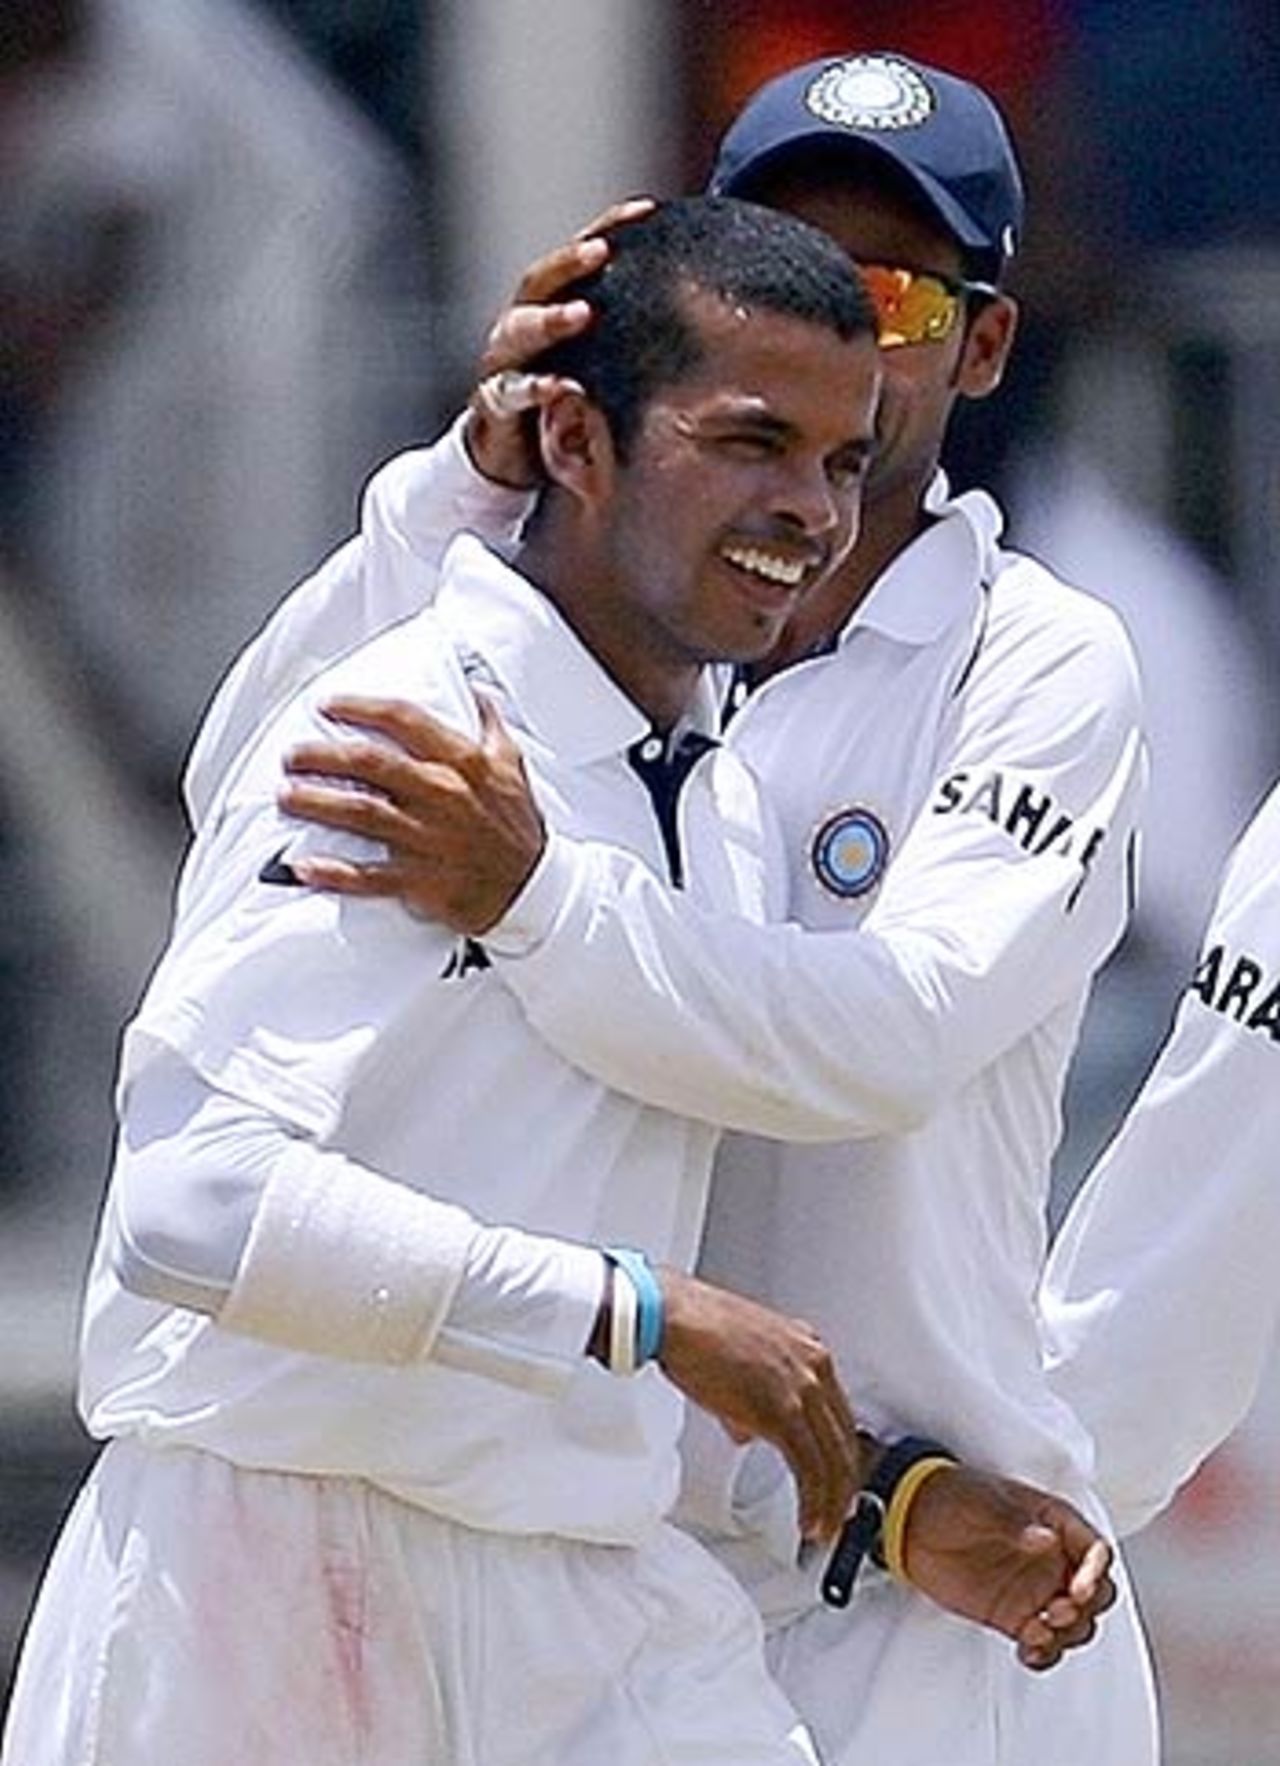 Sreesanth took the vital wickets of Ramnaresh Sarwan and Brian Lara before lunch, West Indies v India, 1st Test, Antigua, 5th day, June 6, 2006